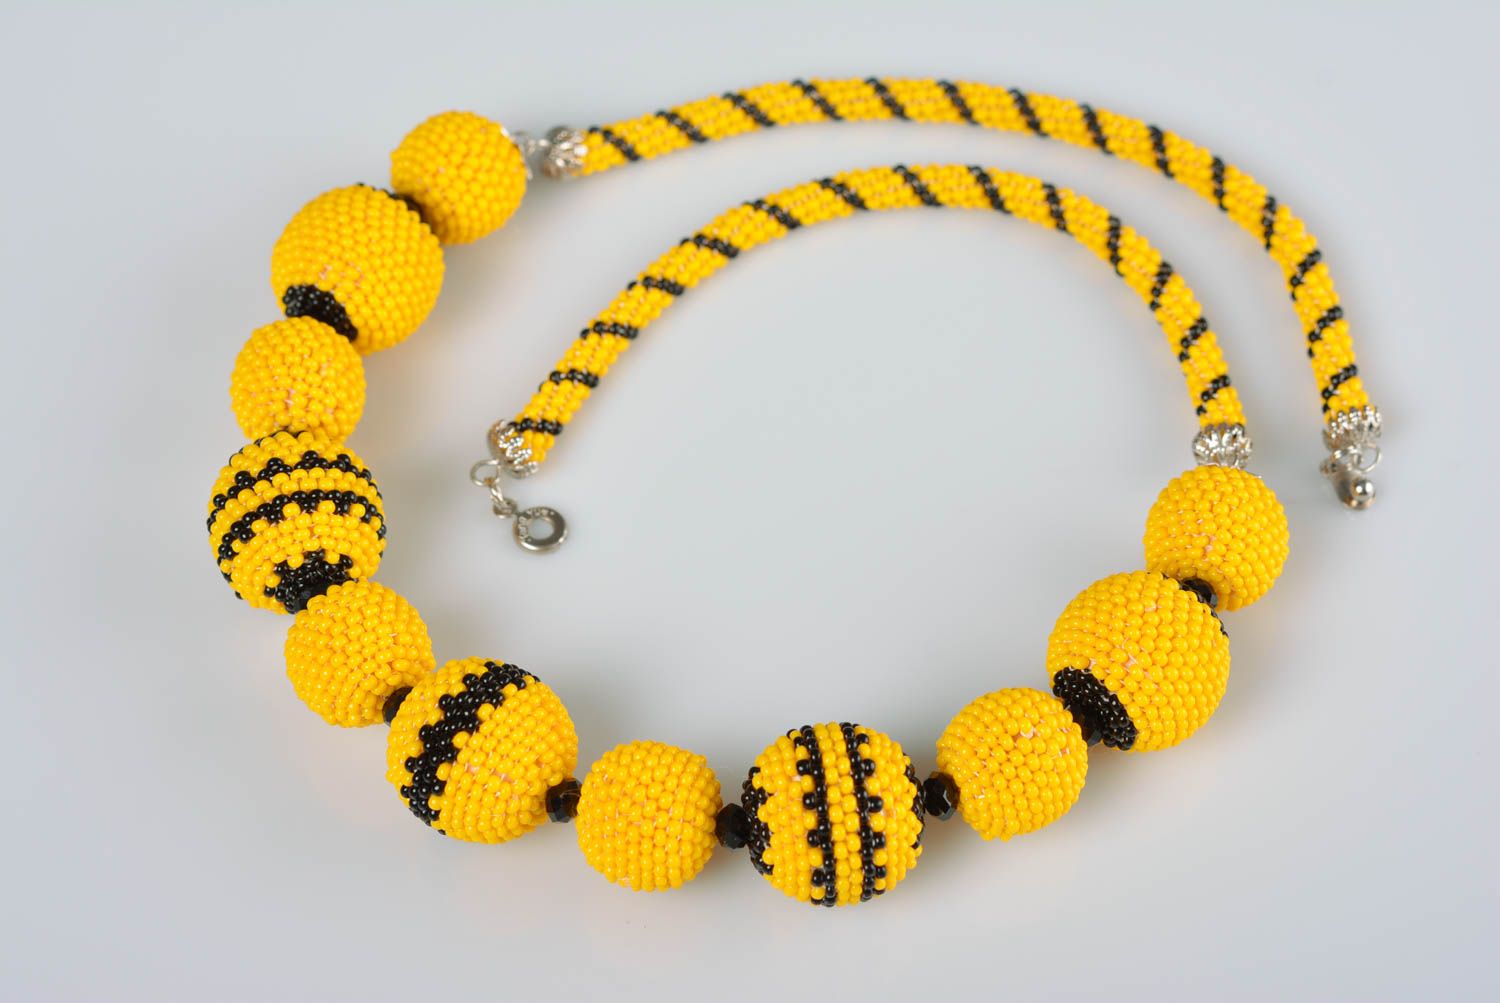 Beaded necklace of yellow color handmade bright designer stylish accessory photo 1